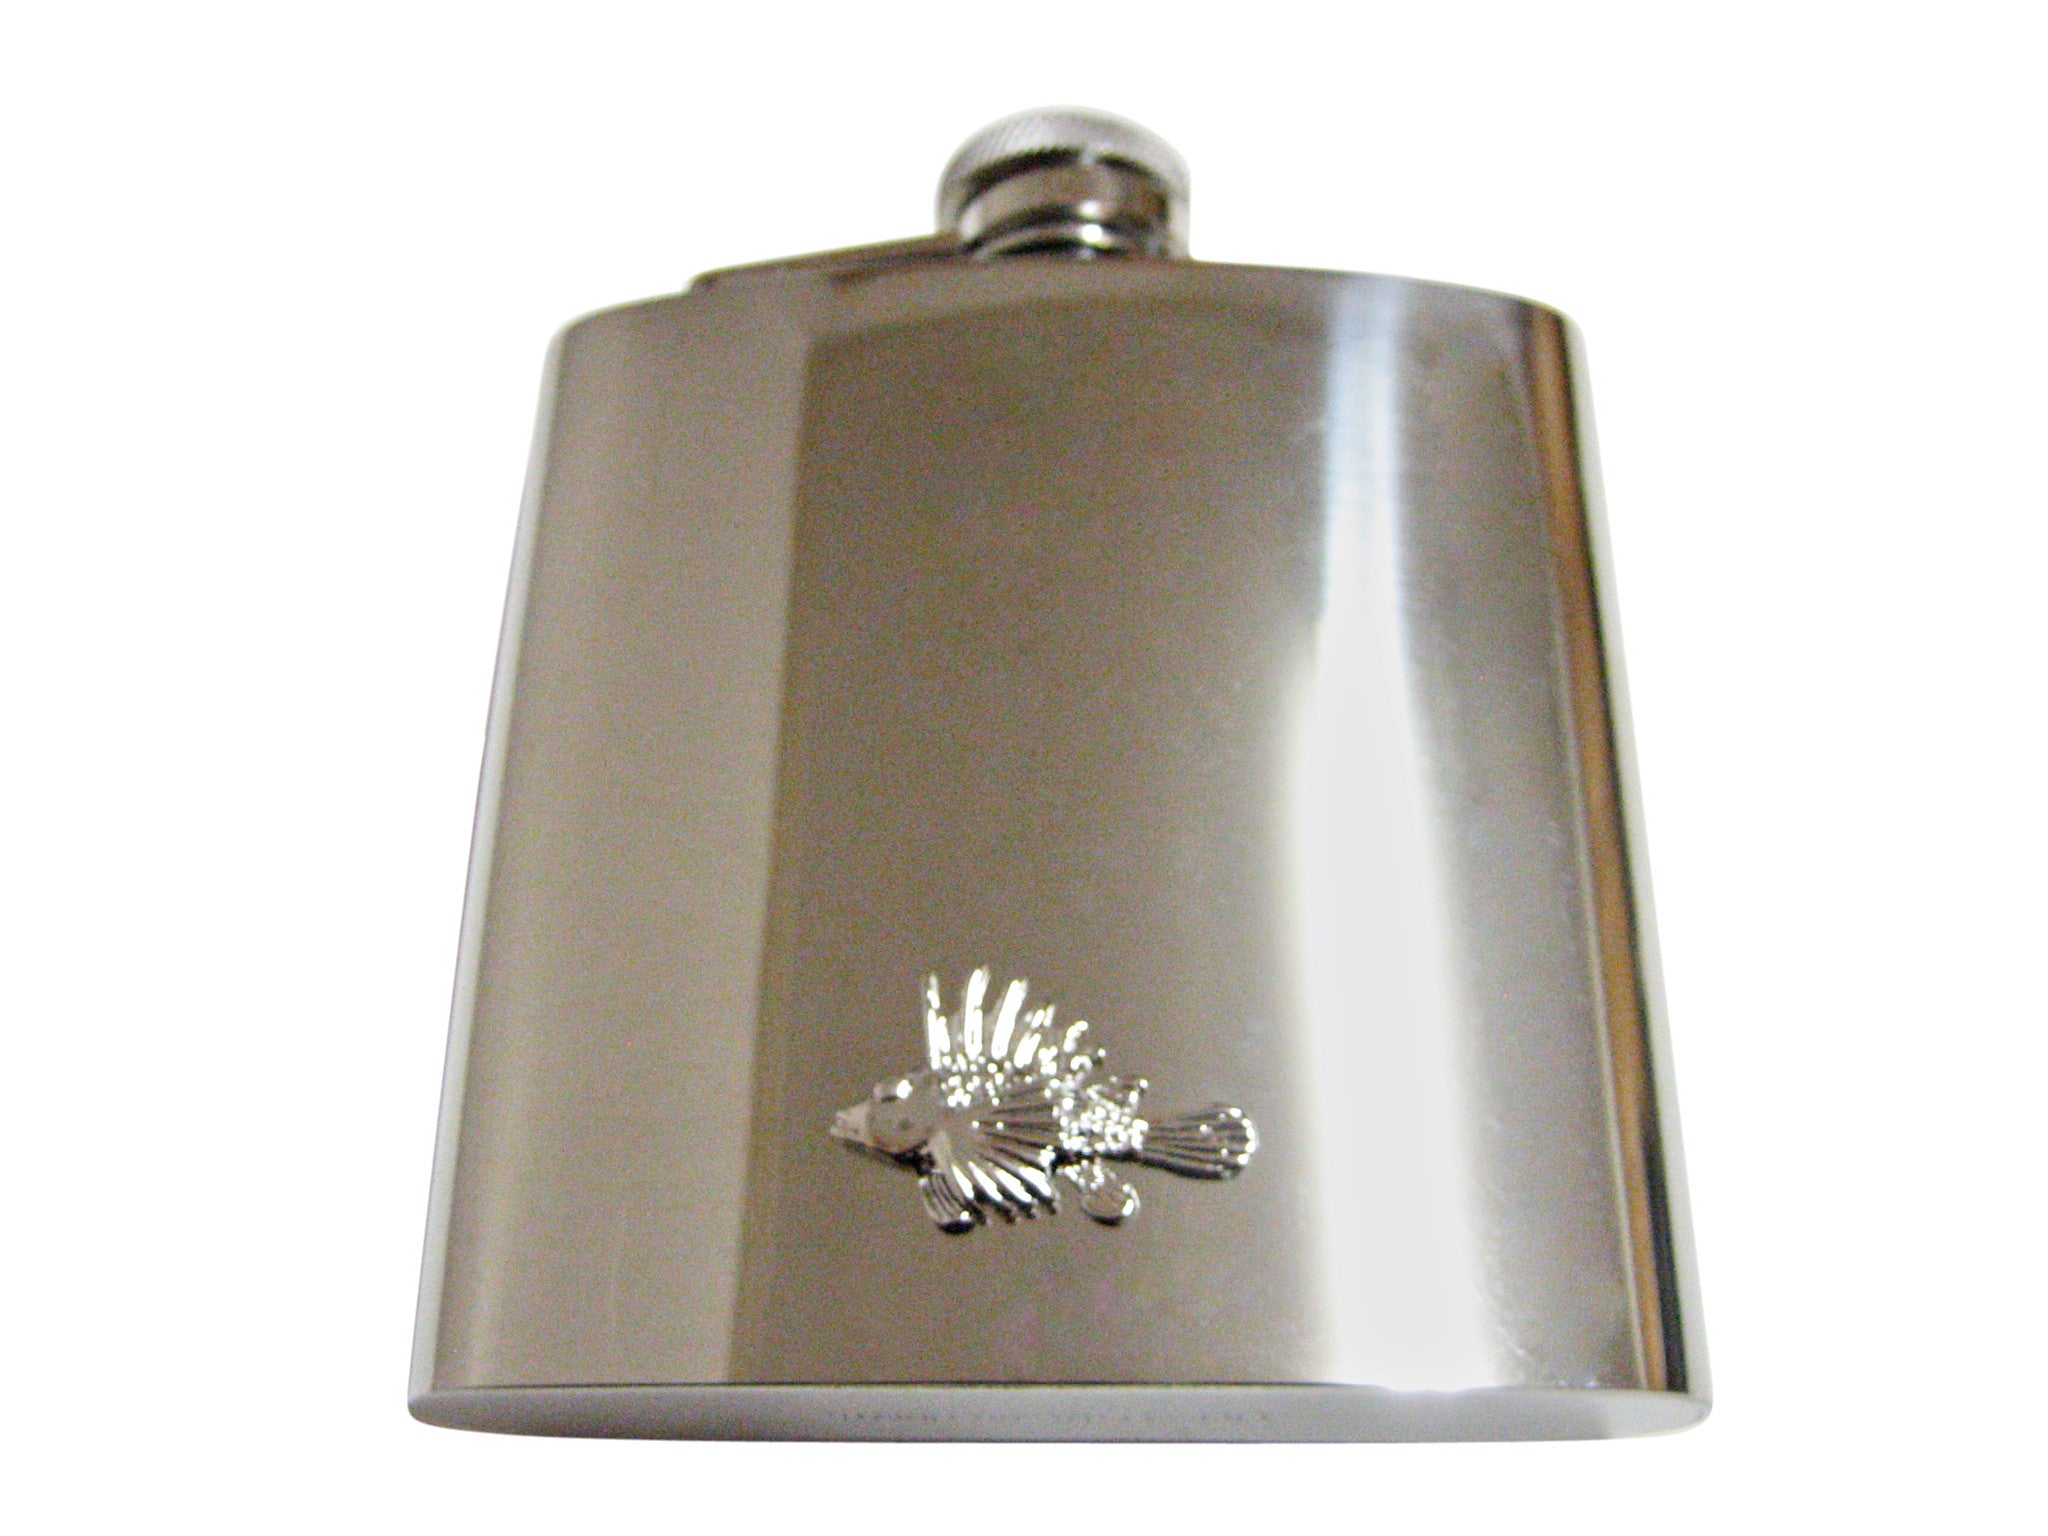 Spiky Tropical Fish 6 Oz. Stainless Steel Flask